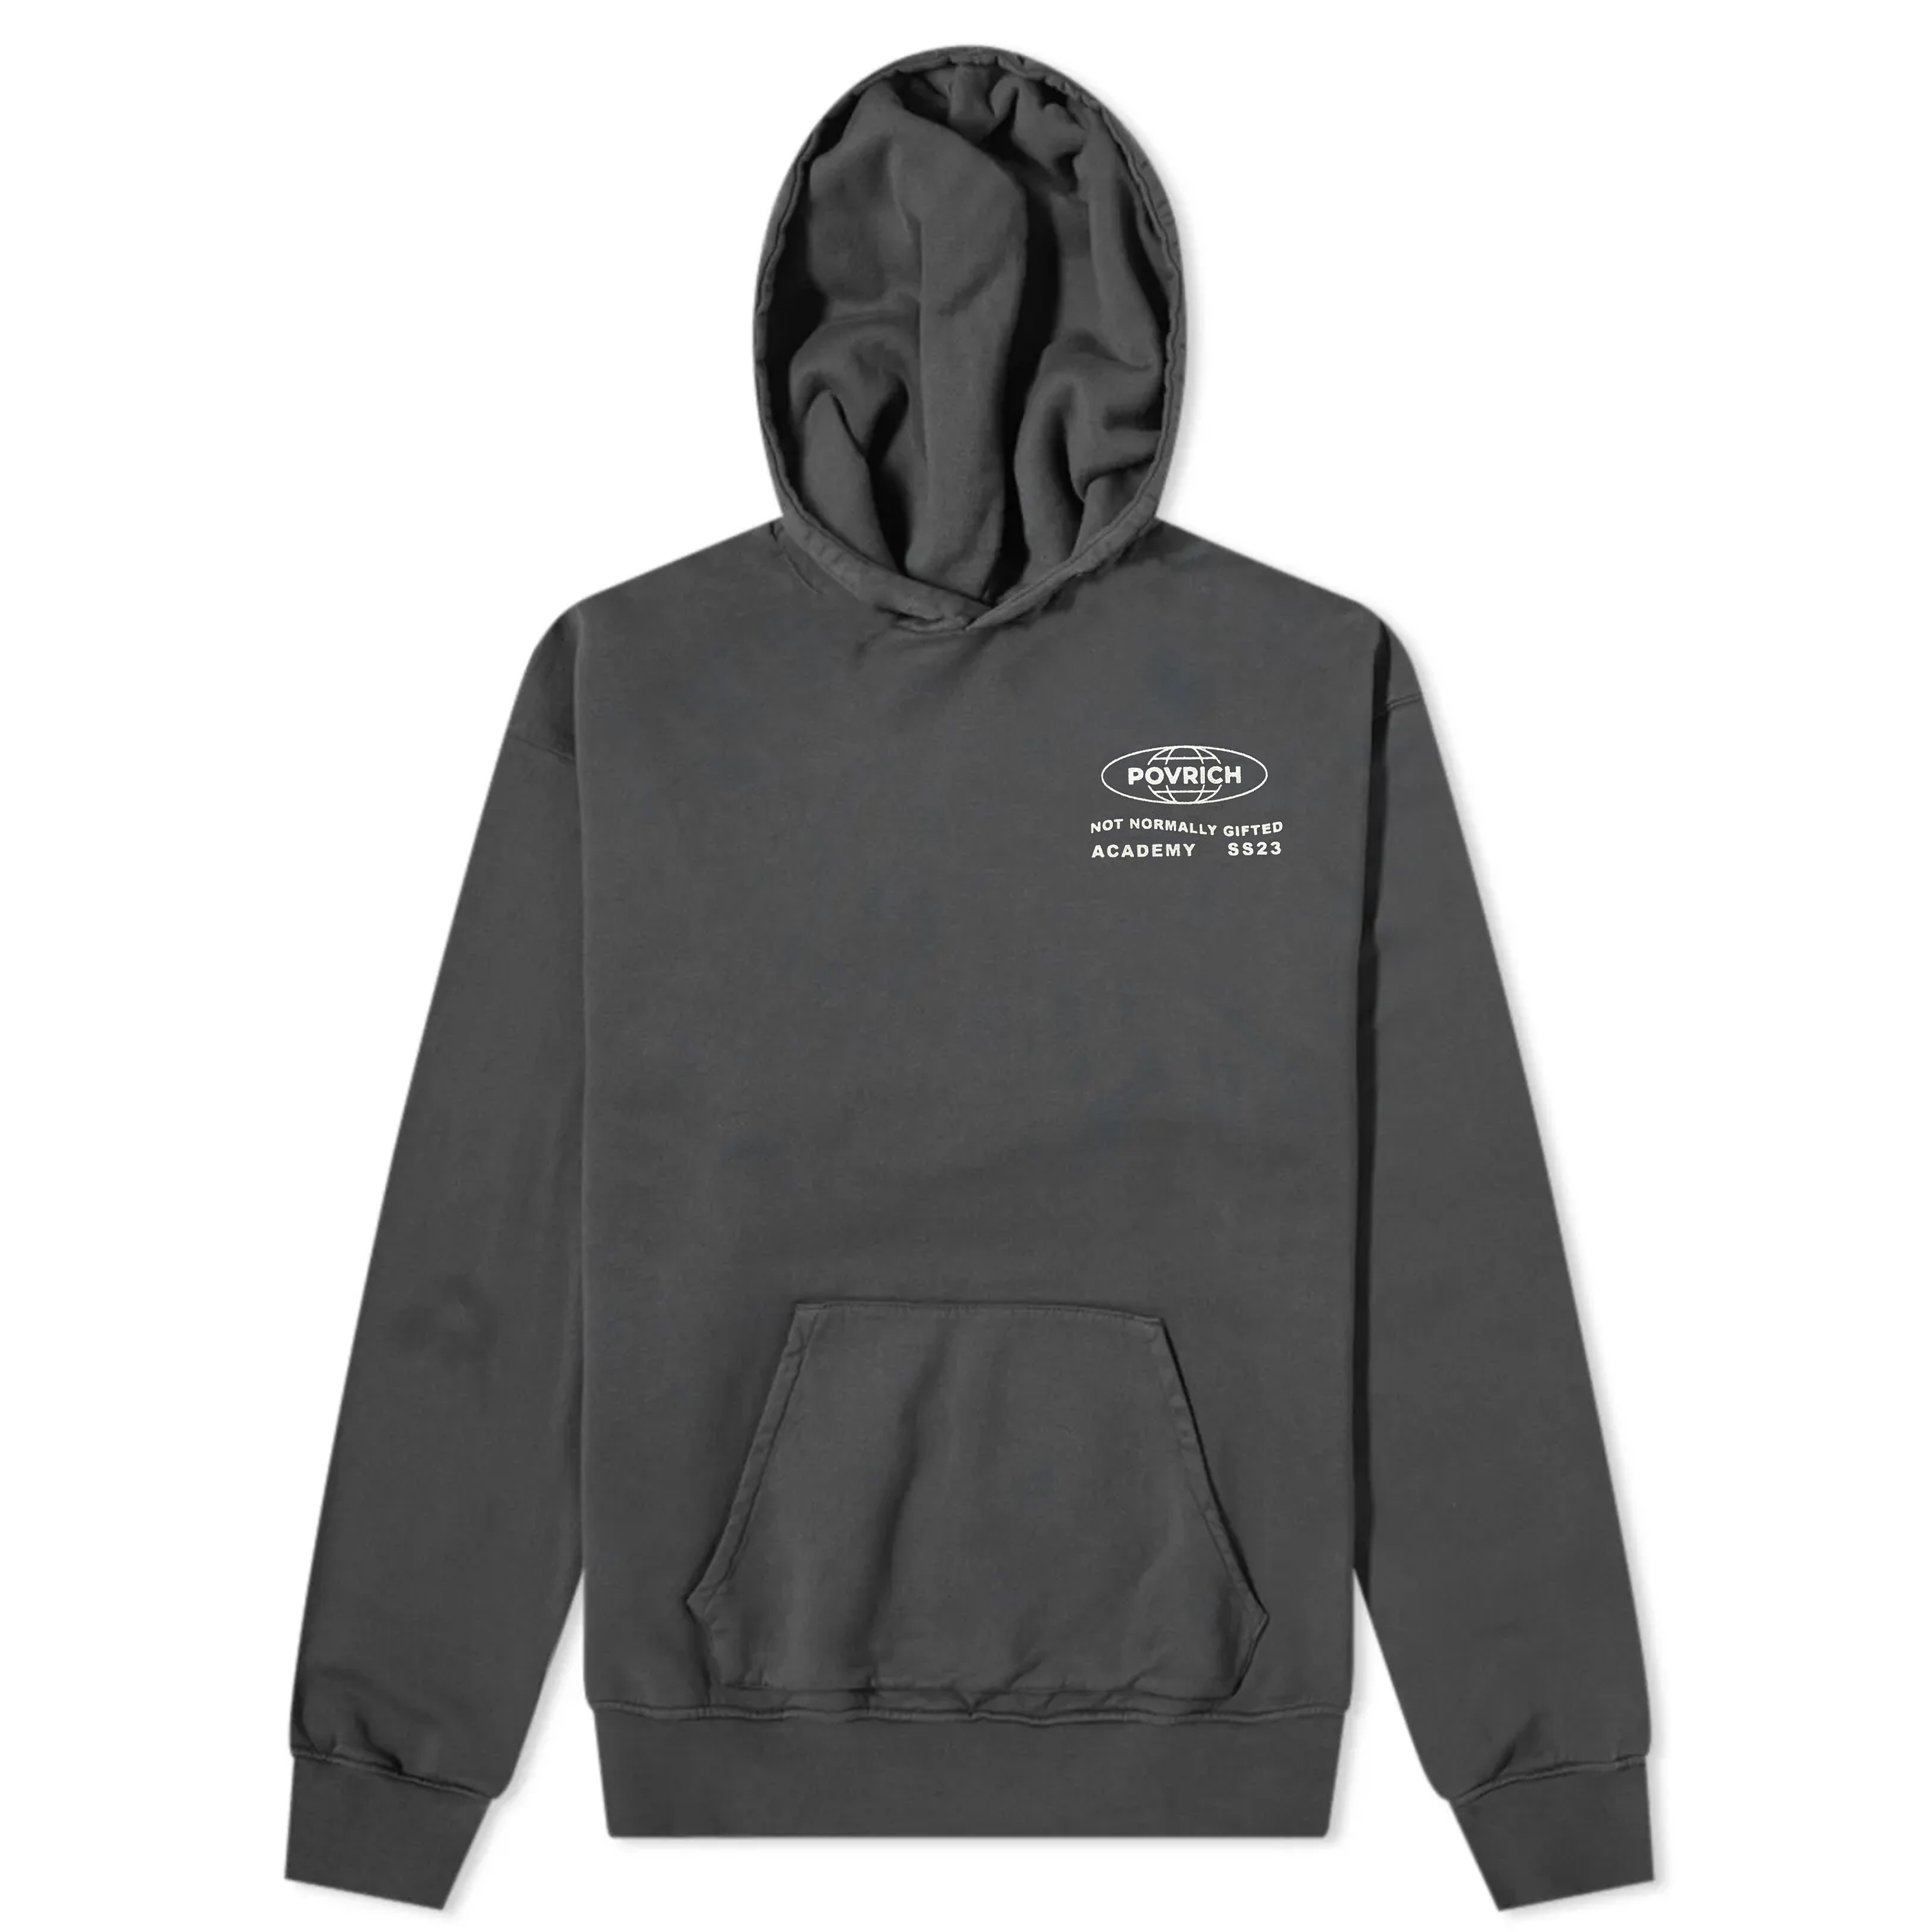 Povrich Empathetic Hoodie in washed grey with print at front and back. Made from high-quality 400 GSM cotton for warmth and durability. Features a drawstring hood, ribbed cuffs and hem, and a front kangaroo pocket. Perfect for casual streetwear looks